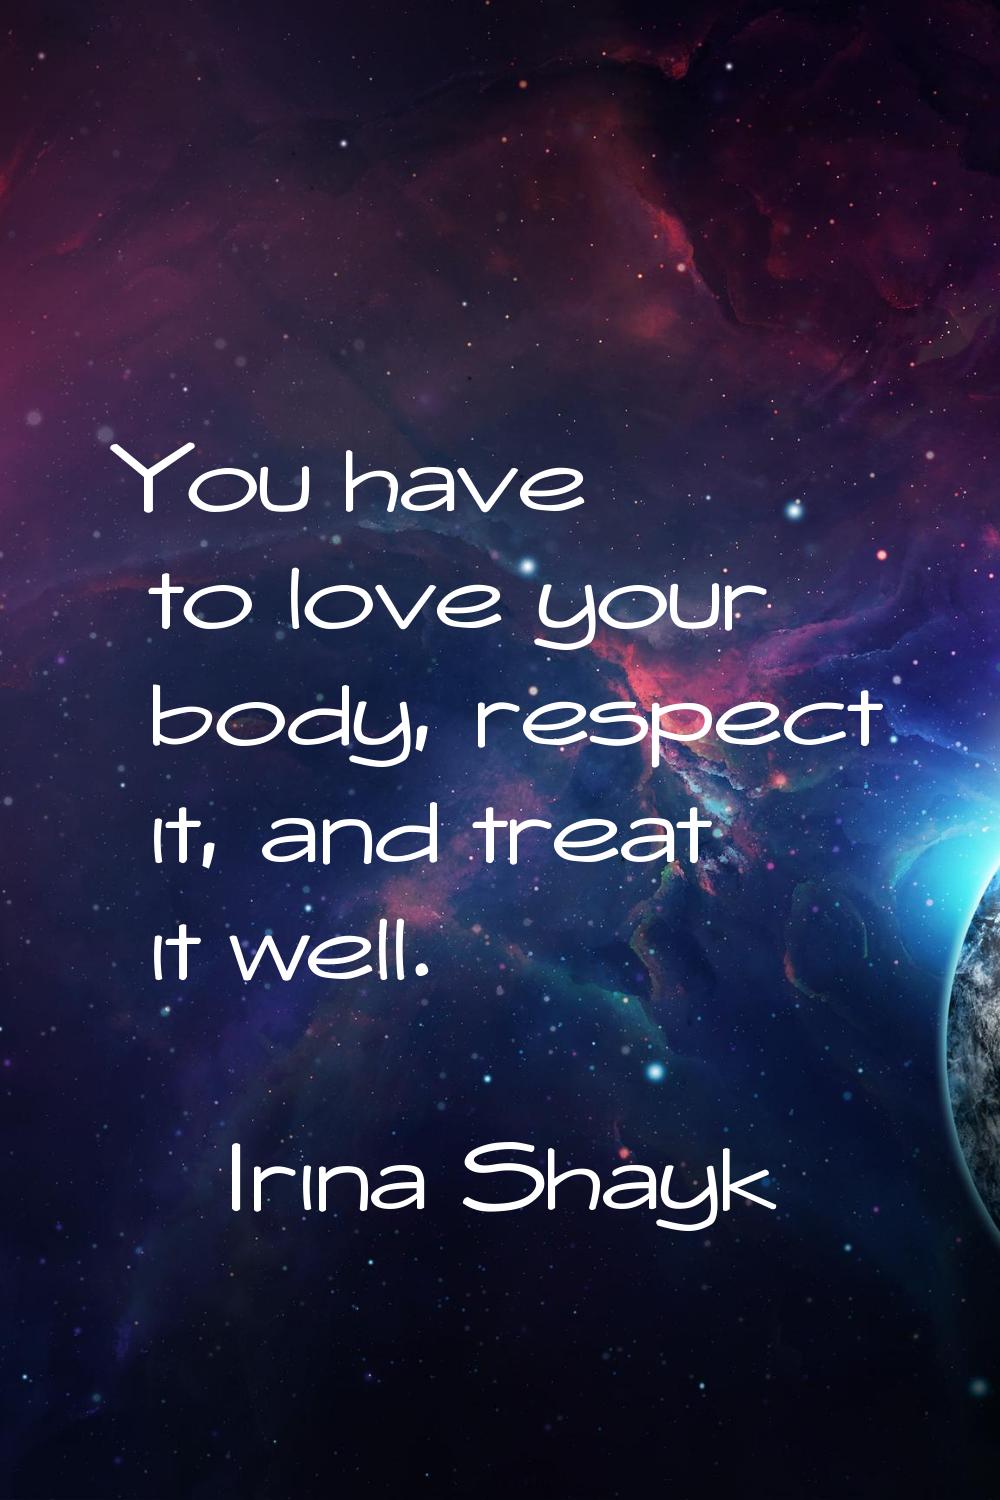 You have to love your body, respect it, and treat it well.